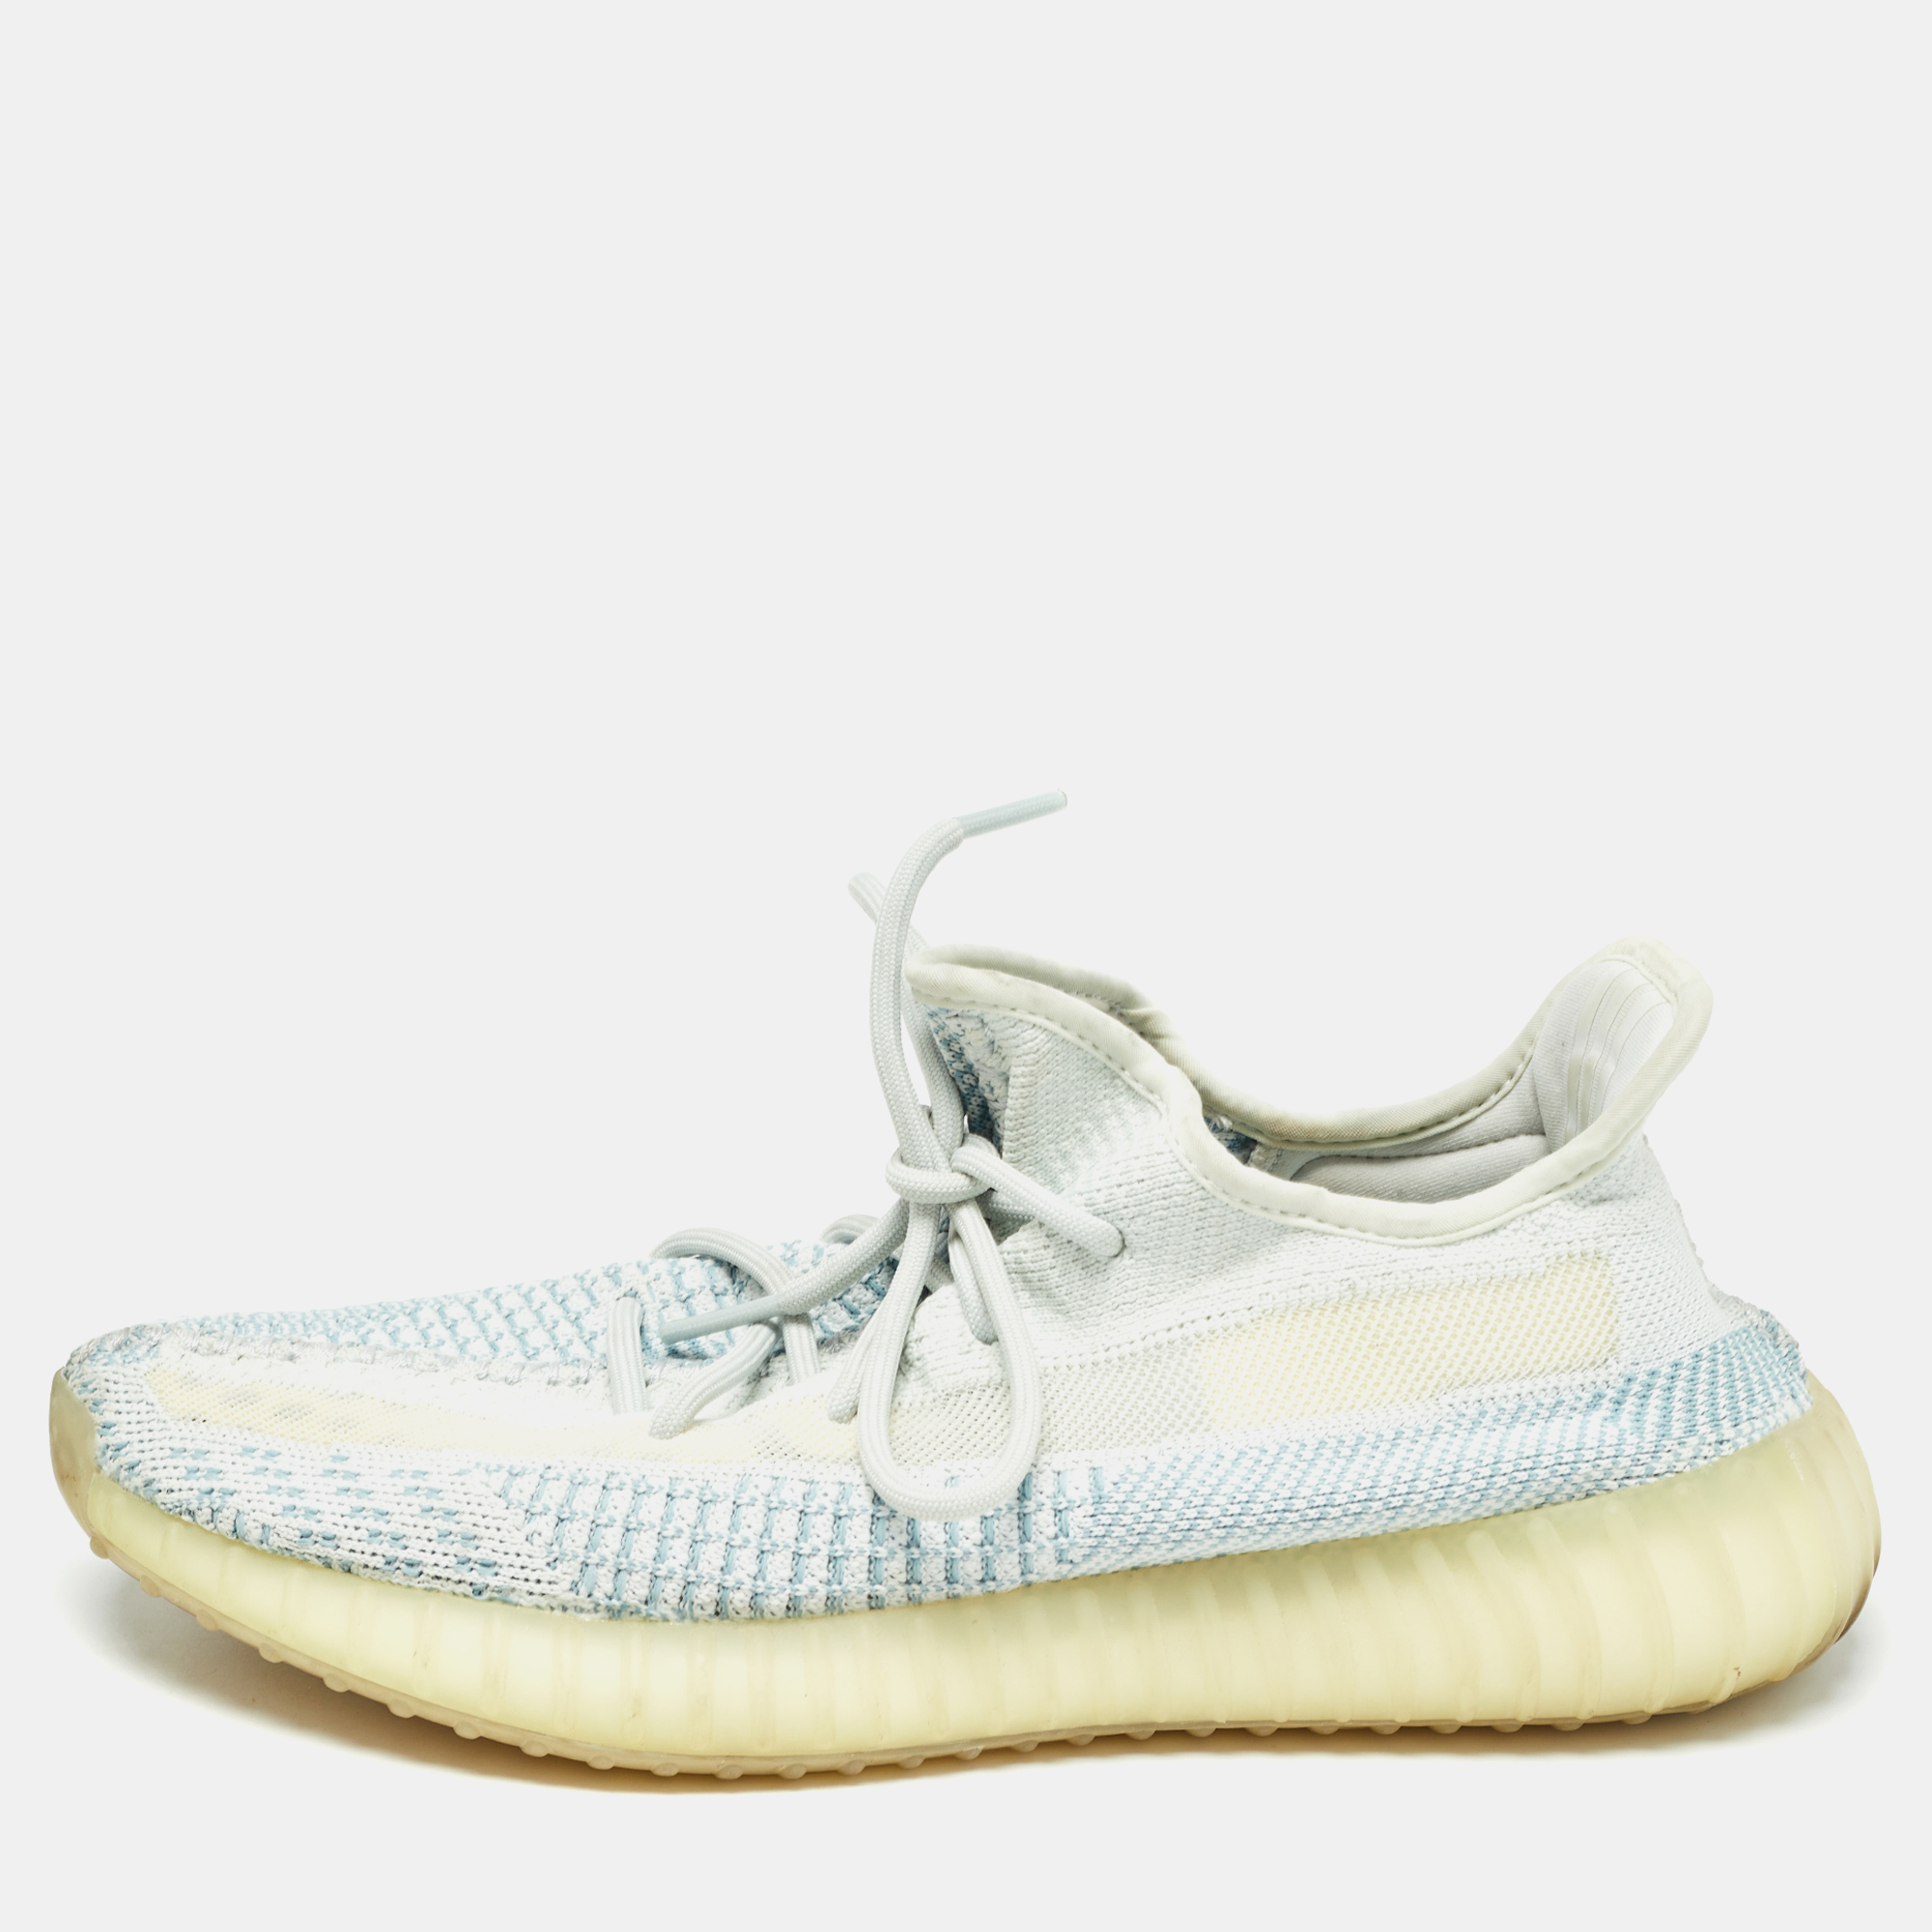 

Yeezy x Adidas White/Green Knit Fabric Boost 350 V2 Cloud White Non Reflective Sneakers Size, Grey